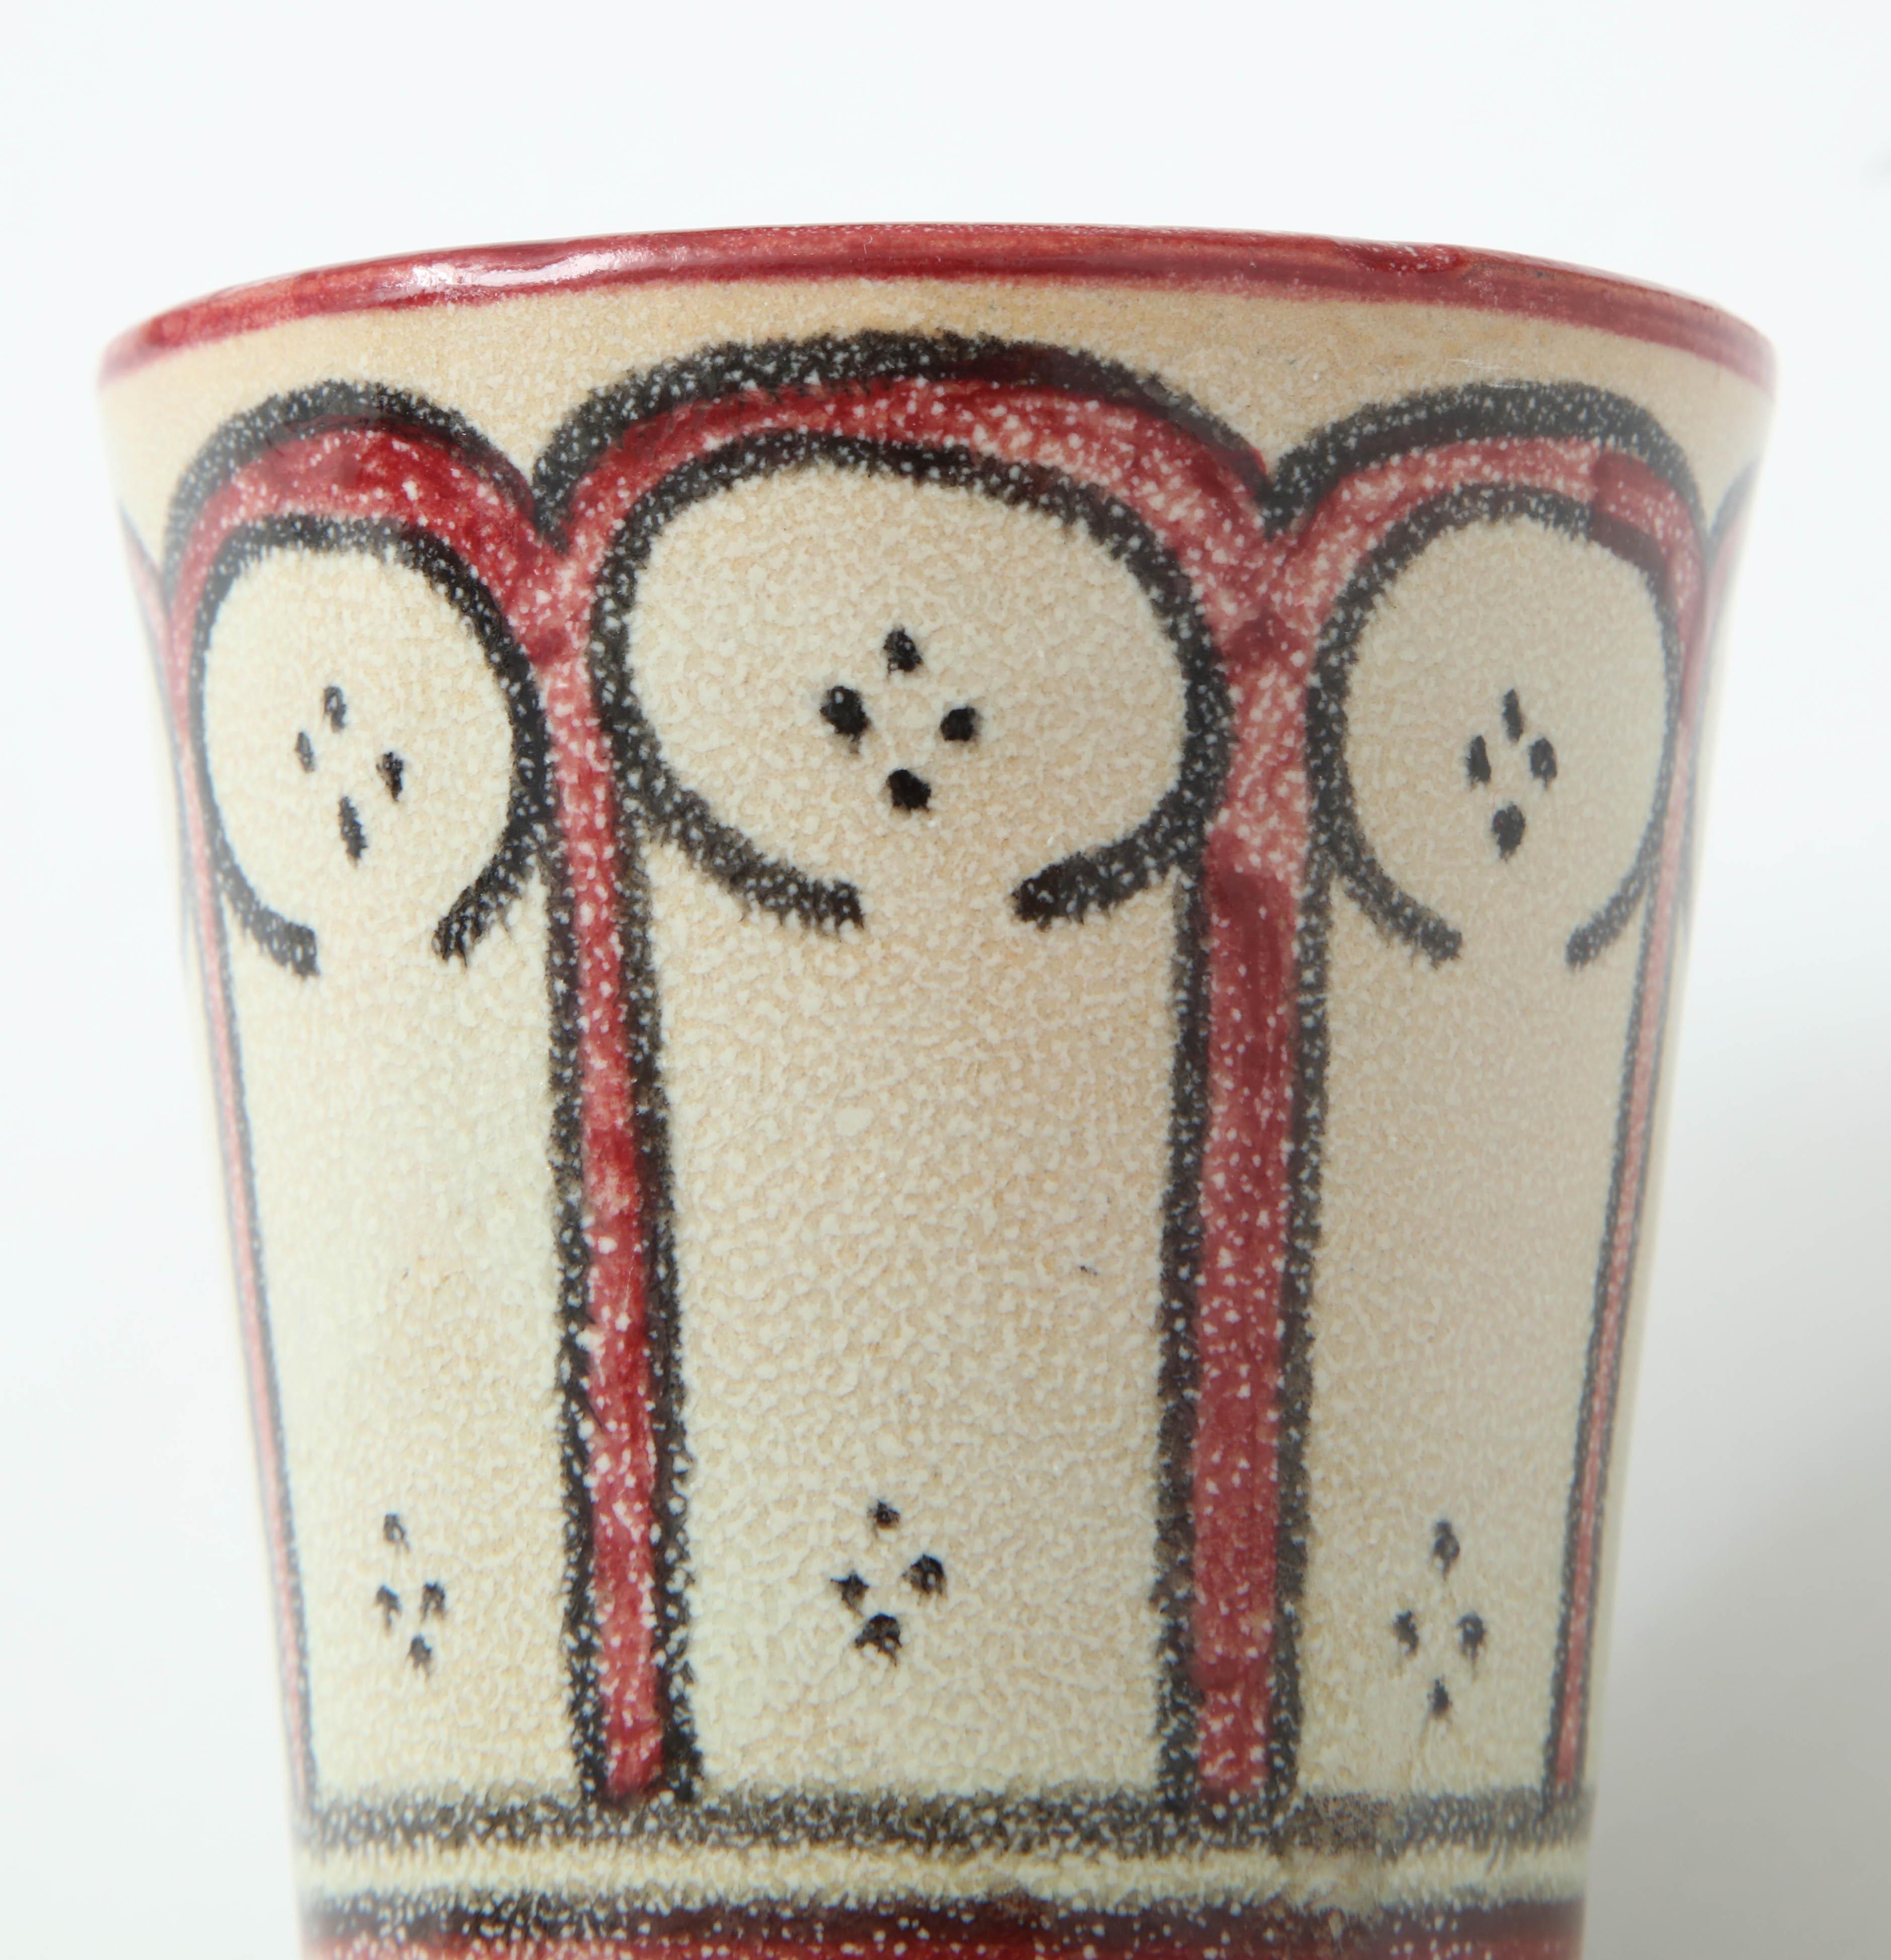 Hand-Crafted Ceramic Vessel, Red, Black and Cream, Handcrafted, Morocco, Contemporary